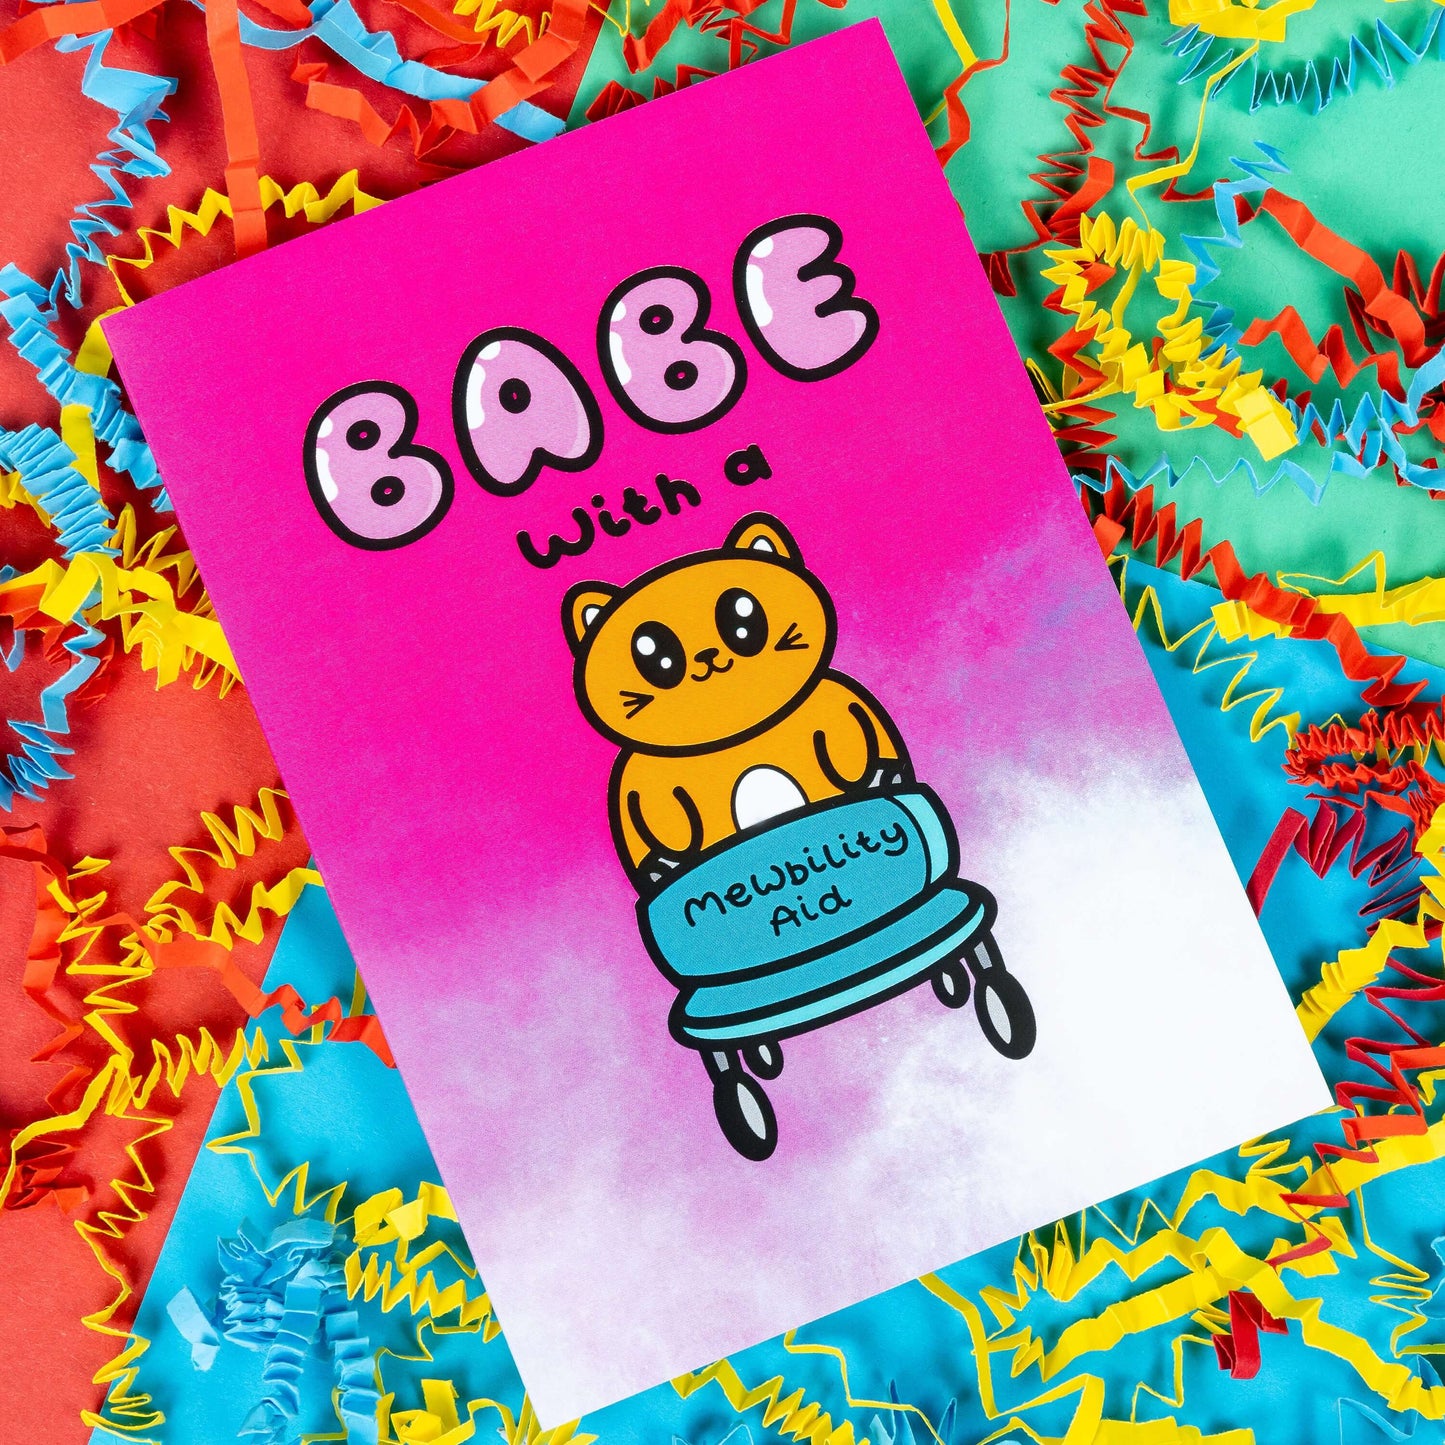 A hot pink and white gradient greeting card with a cute ginger cat holding a blue mobility aid. 'Babe with a mewbility aid' is written on the card. The background of the photo is colourful card confetti. Design inspired by disabilities and chronic illness.